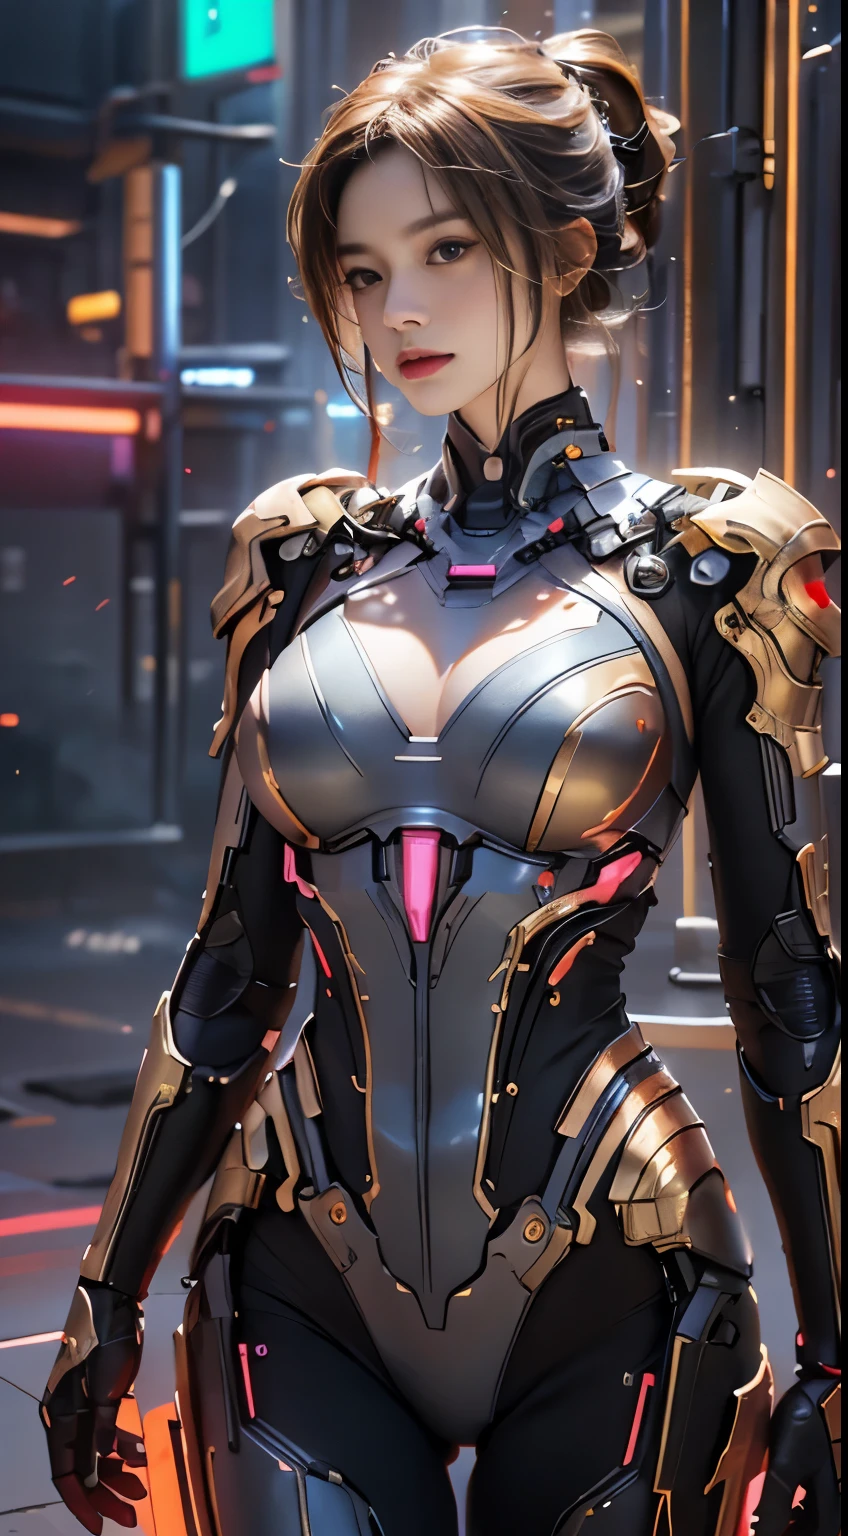 
Virtual image,Realistic 8K images,hips up,Masterpiece,Complete Anatomy,Complete dynamic composition,Light hits the front,woman 1,alone,ผมยาวสีน้ำตาลgold,robot,complex machinery,Machines of the future world,Machinery with colorful neon lights,There is a bright neon light on the figure&#39;s chest.,Very bright,red machine metallic-white_ titeneim,orange_gold_metal,,,Abstract city background at night
